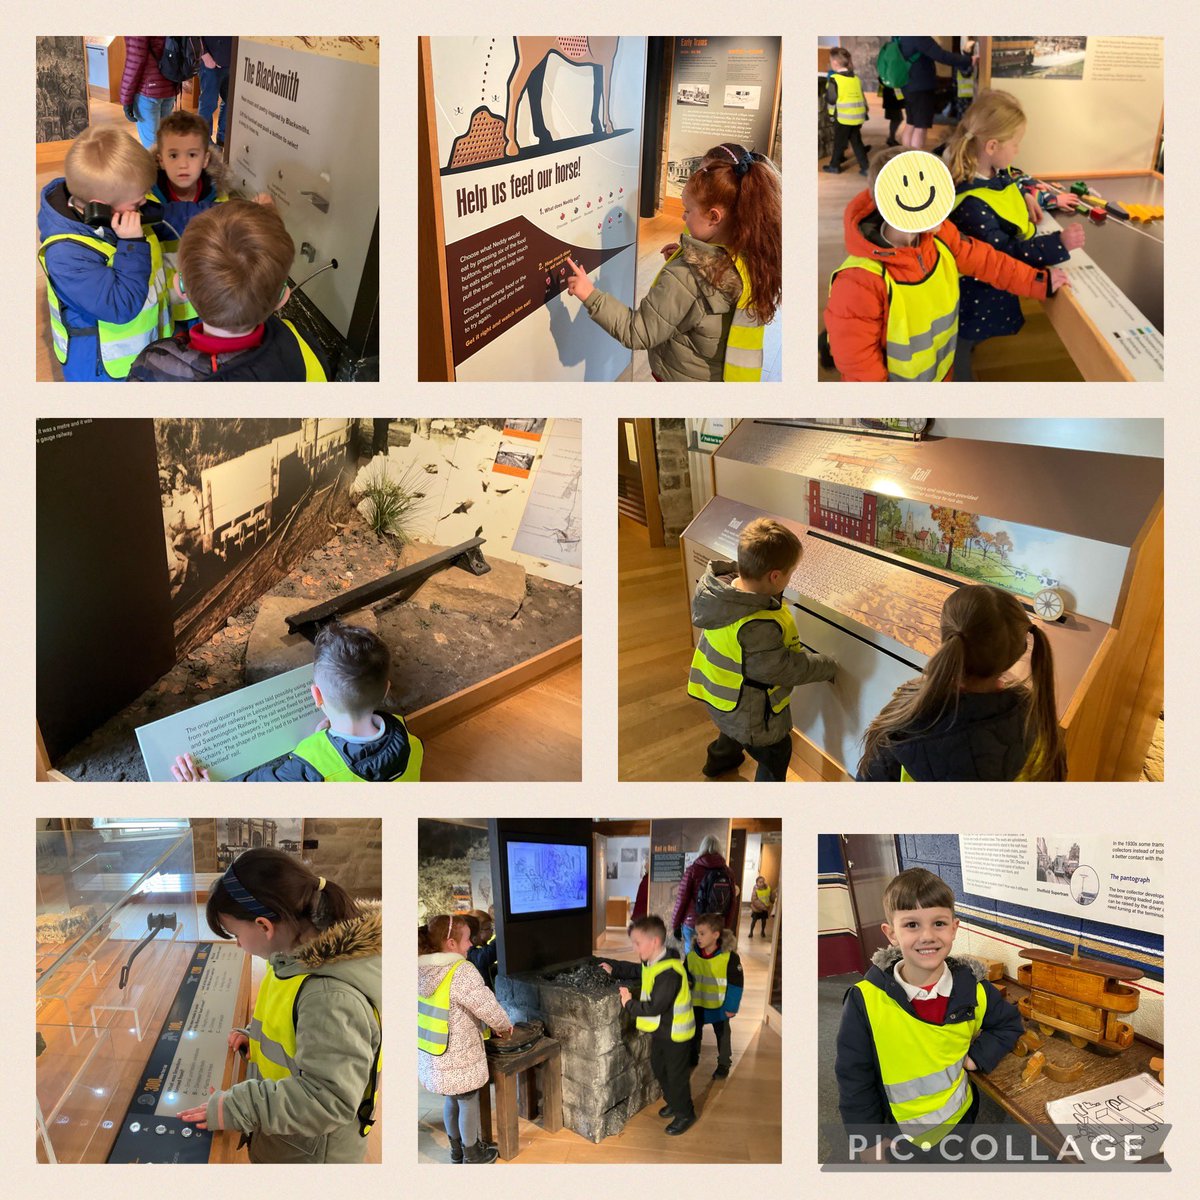 Class 1 have loved their day at @CrichTramway. We had a great time exploring the museum and riding on the trams.